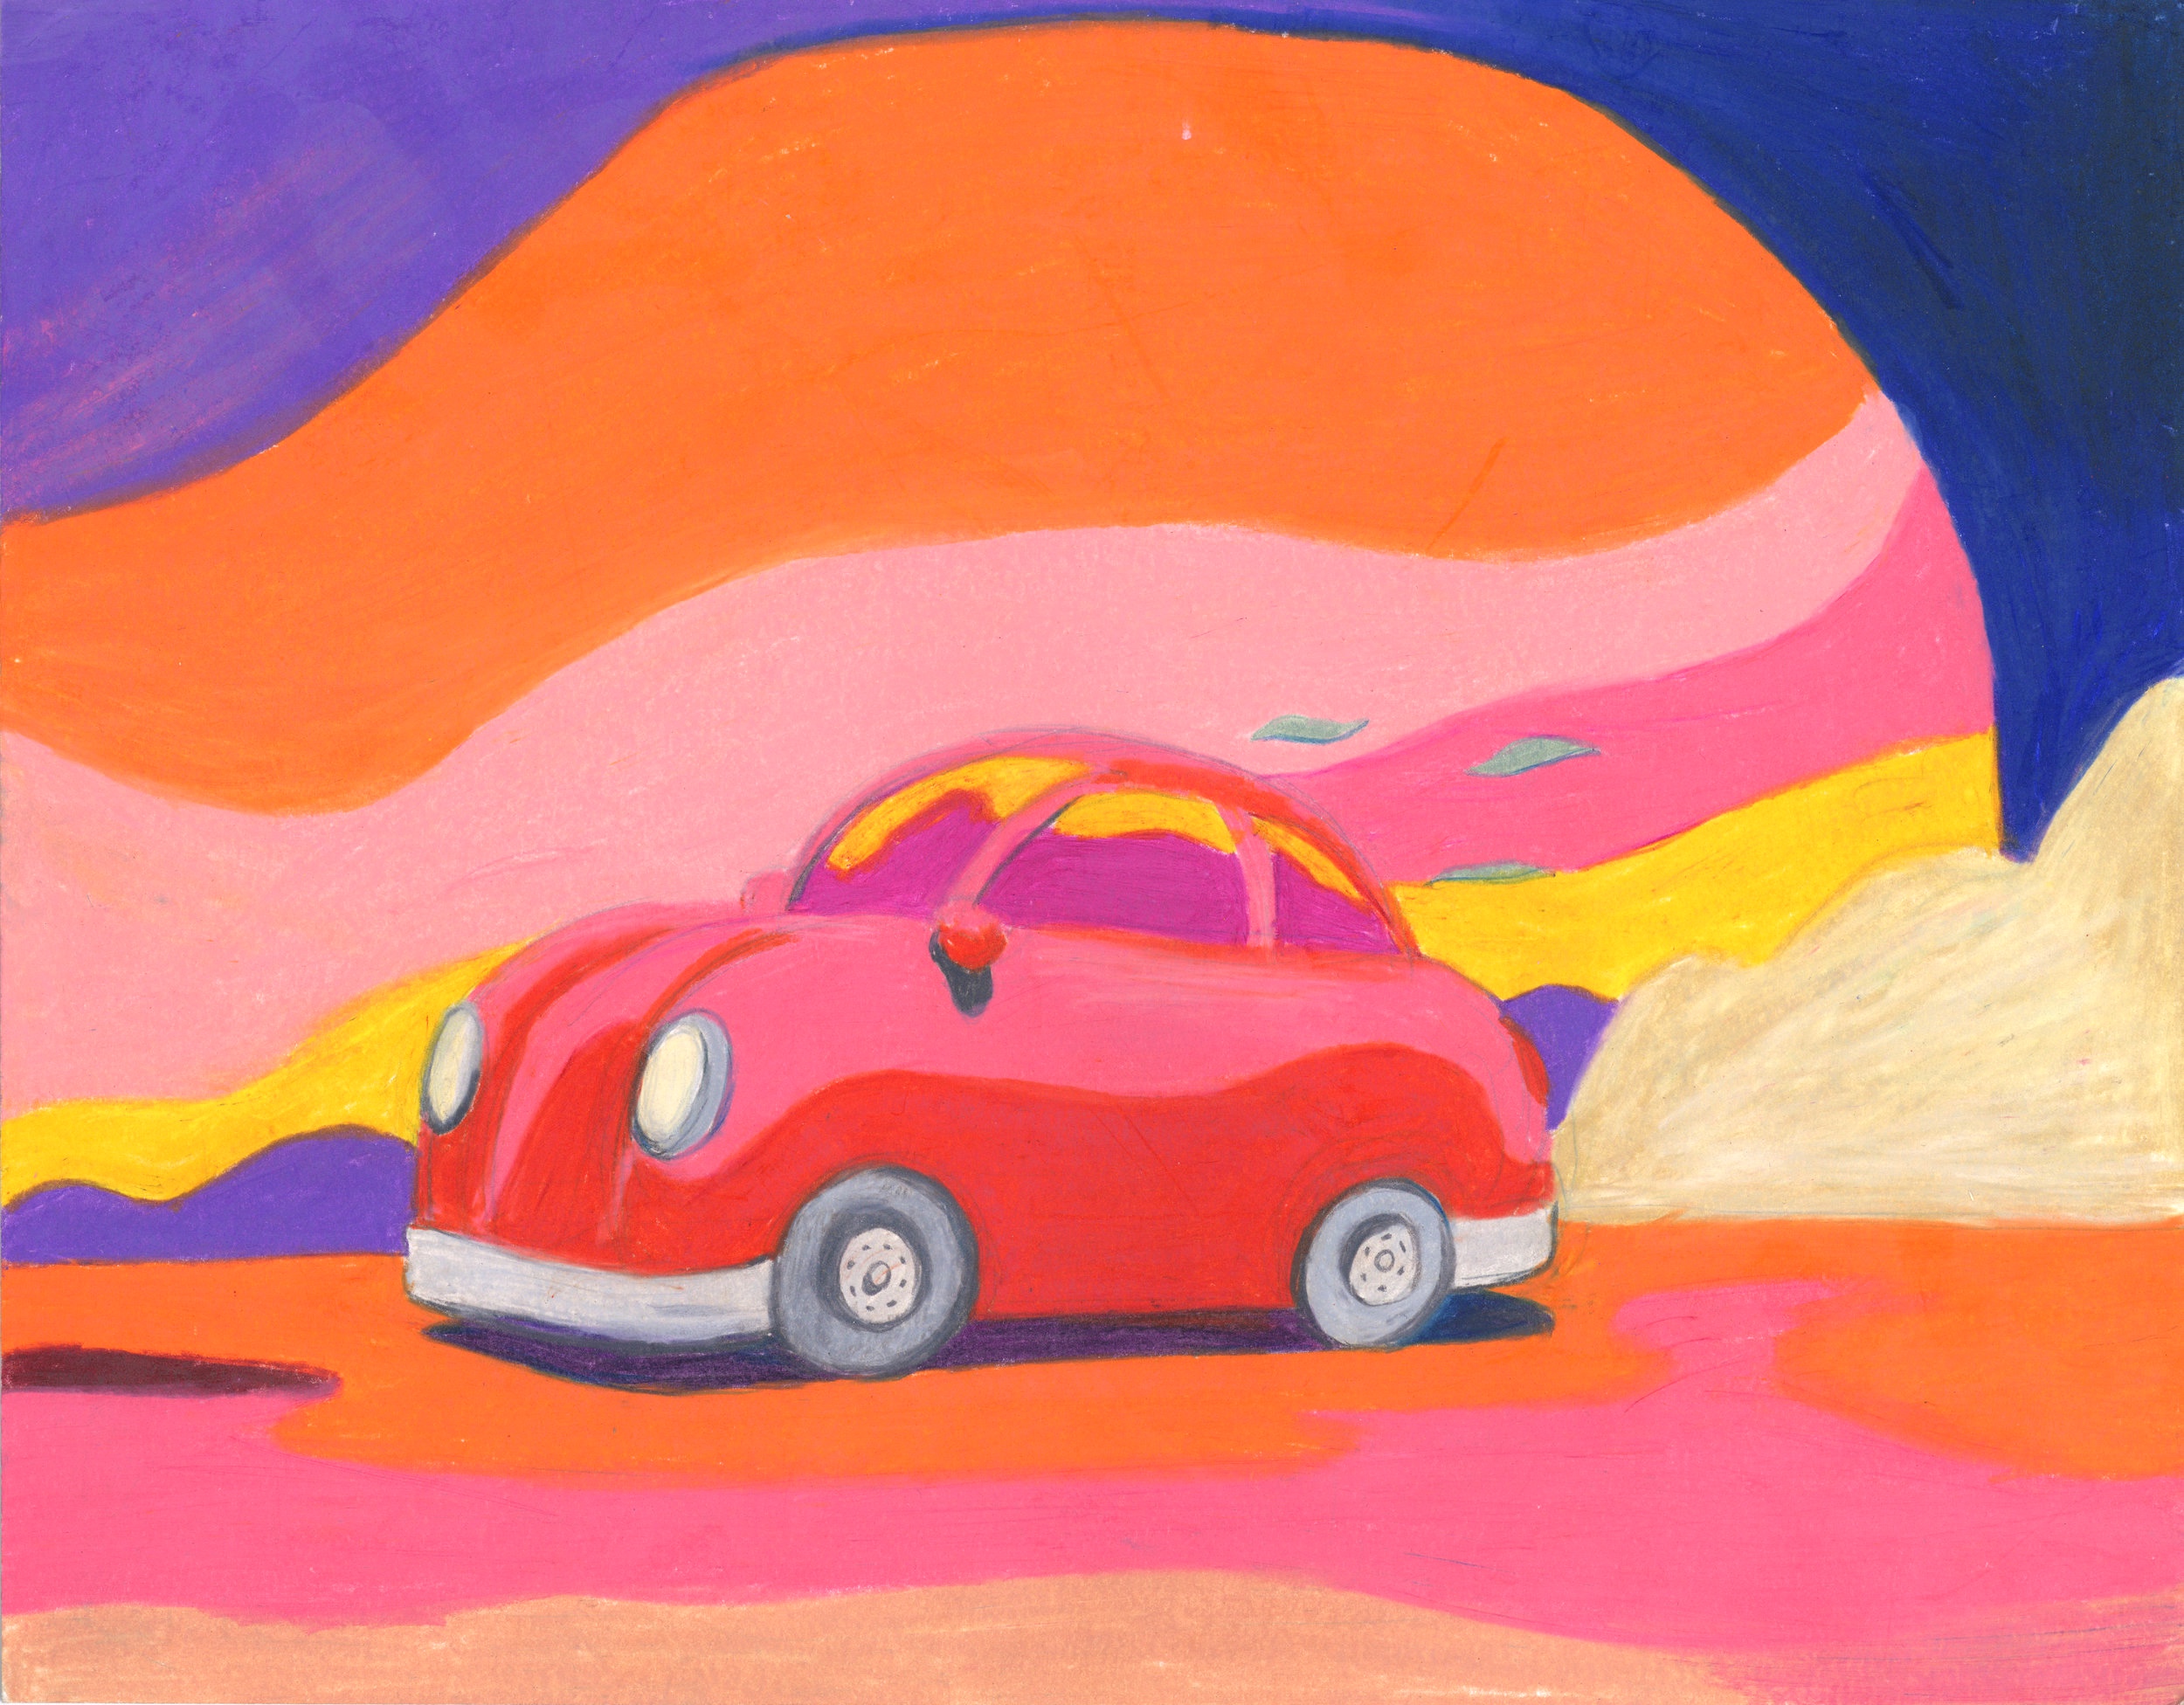 Car - 9" x 12" - Colored Pencil on Paper - 2019